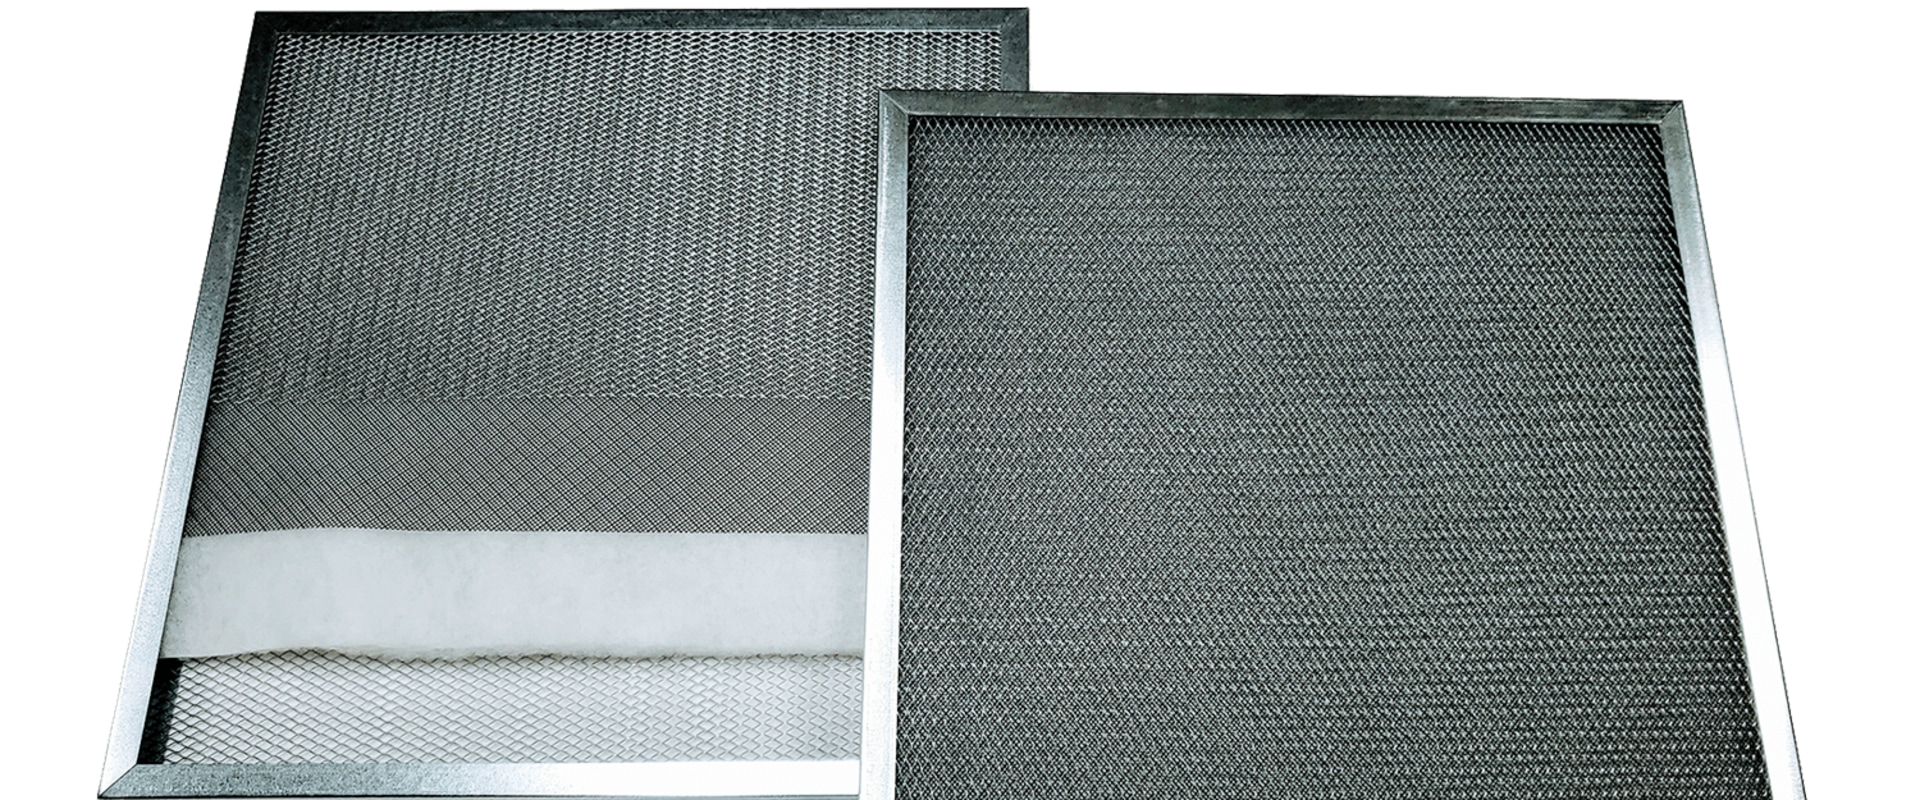 Are Electrostatic Furnace Filters the Best Choice for Your Home?